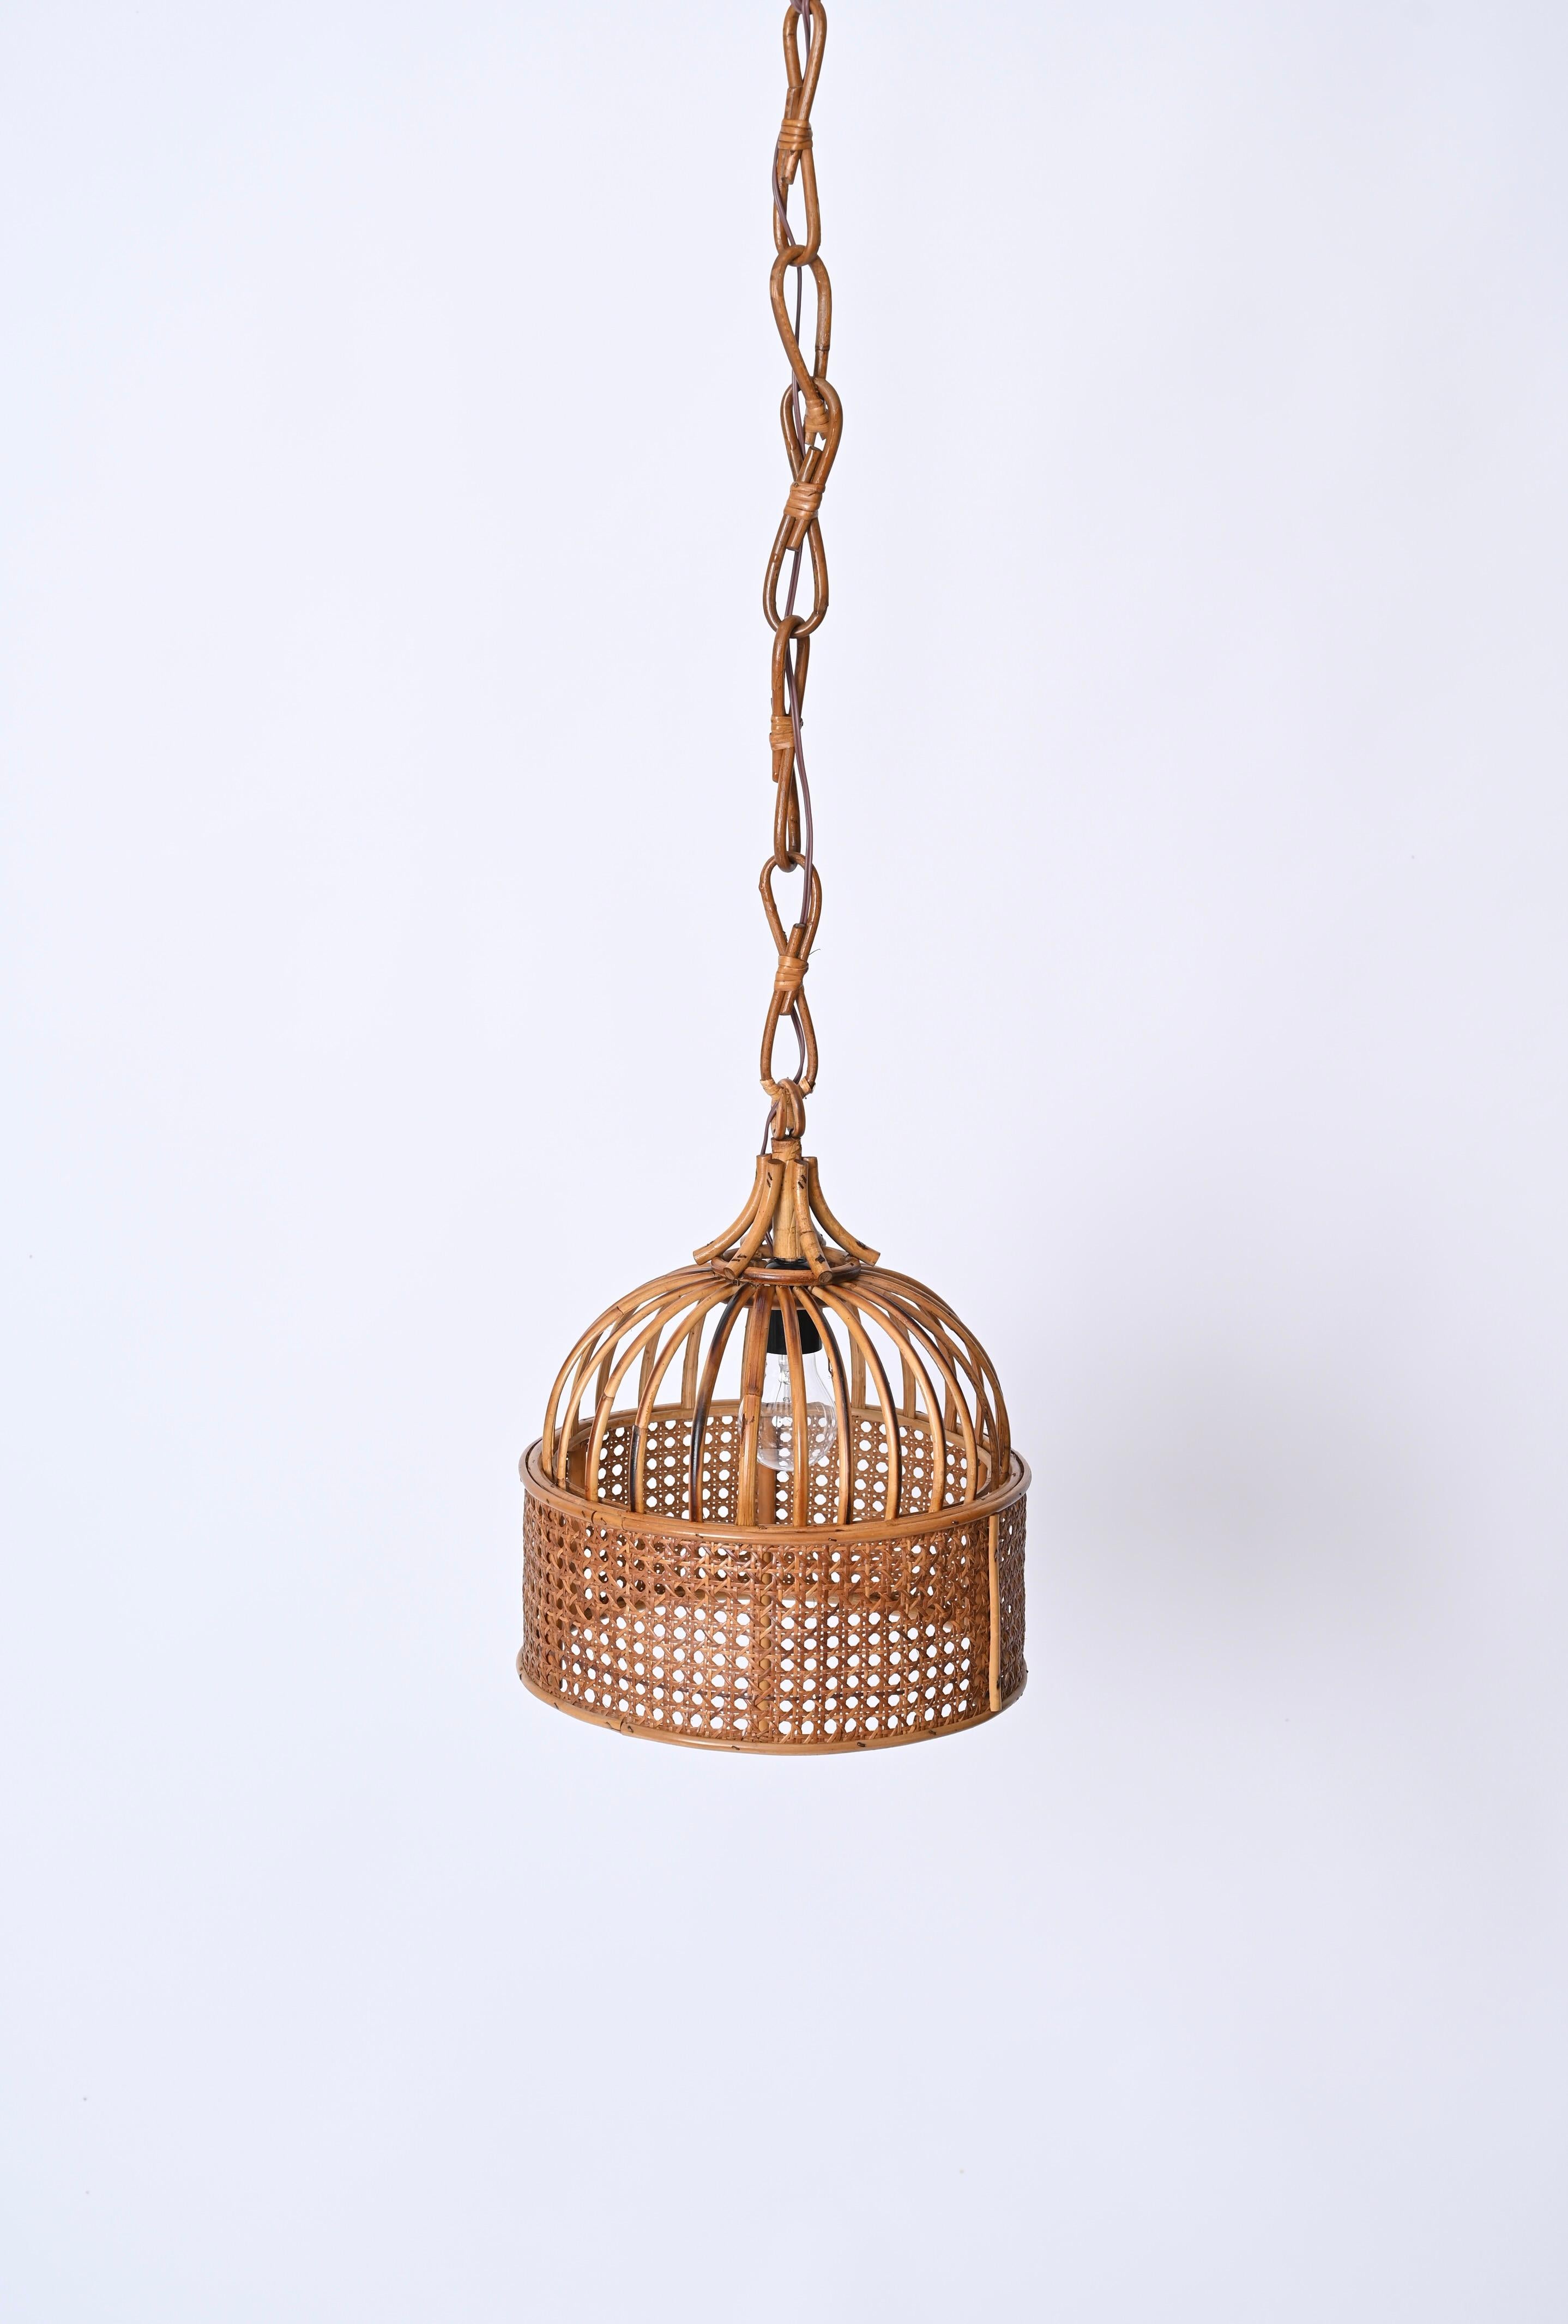 20th Century Midcentury French Riviera Round Pendant in Rattan and Wicker, Italy 1970s For Sale